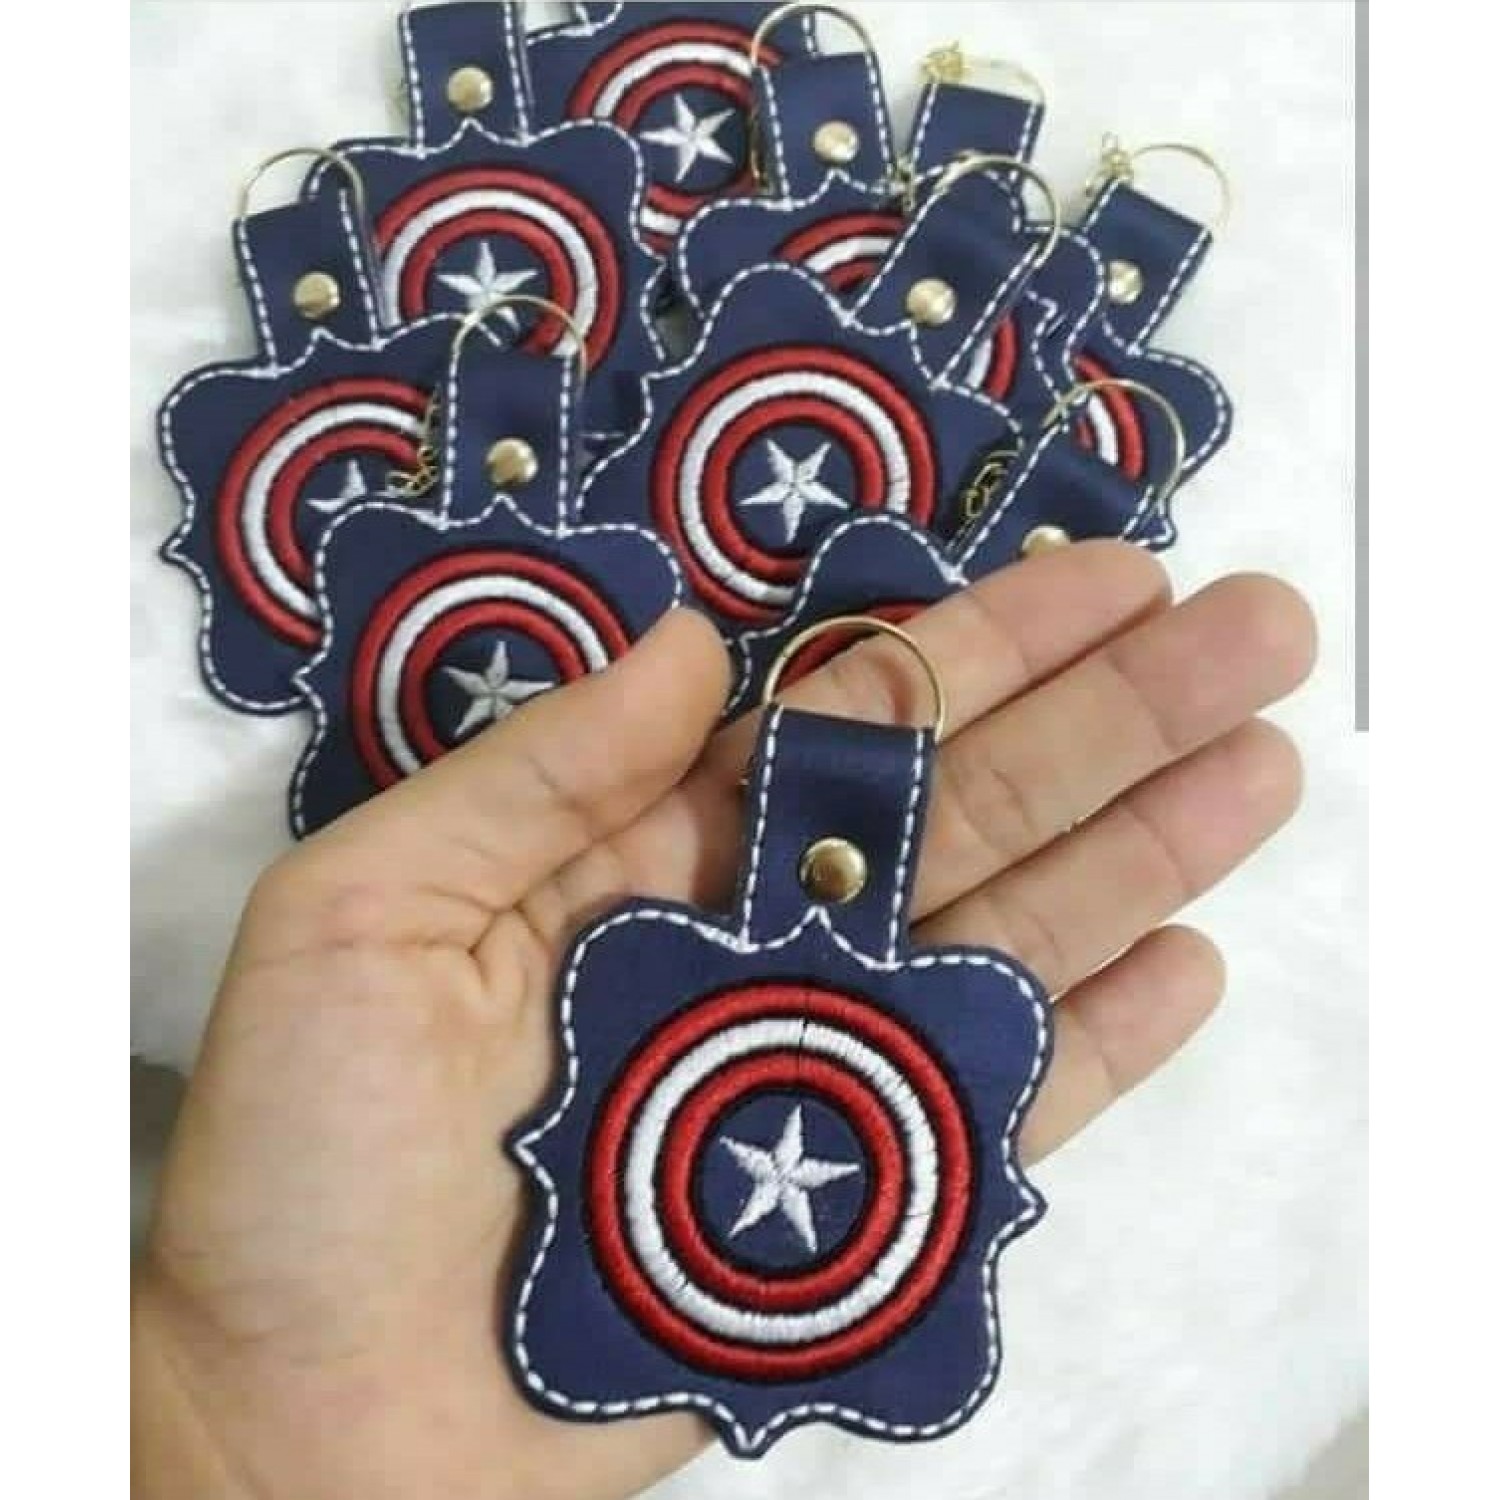 ITH Super Heroes Key Fob Embroidery Design